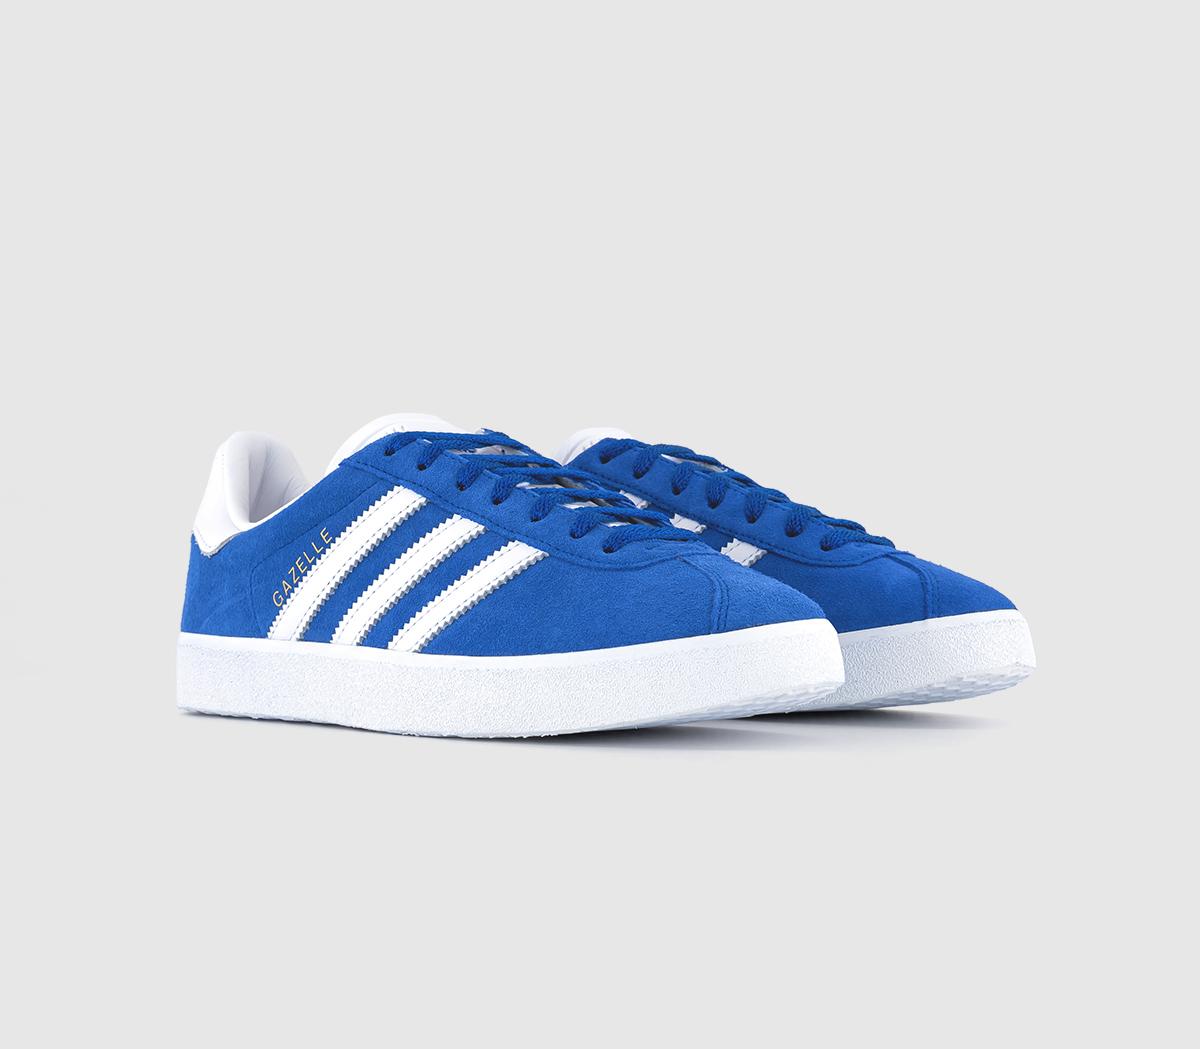 Adidas Womens Gazelle 85 Trainers Royal Blue White Gold Met, 6